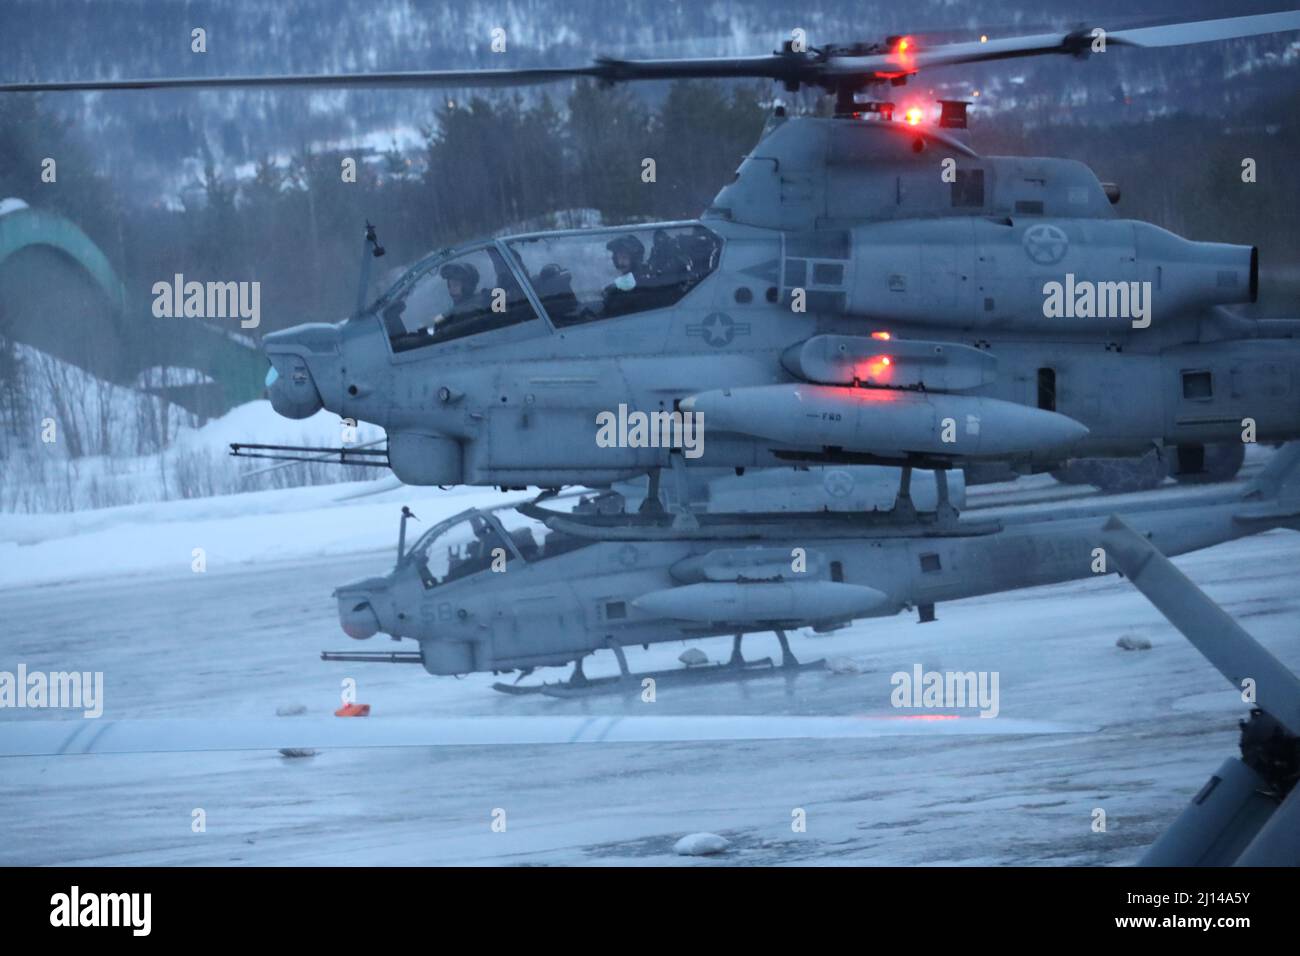 Setermoen, Norway. 17 March, 2022. U.S. Marine Corps Capt. Jospeh Rule and Maj. Brain Blanco, with the 2nd Marine Aircraft Wing, pilot their AH-1Z Viper attack helicopters during Exercise Cold Response 22, March 17, 2022 in Setermoen, Norway. The biennial Norwegian national readiness and defense exercise is seen as a counter to Russian aggression in the region.  Credit: Sgt. Jonathon Wiederhold/U.S. Marine Corps/Alamy Live News Stock Photo